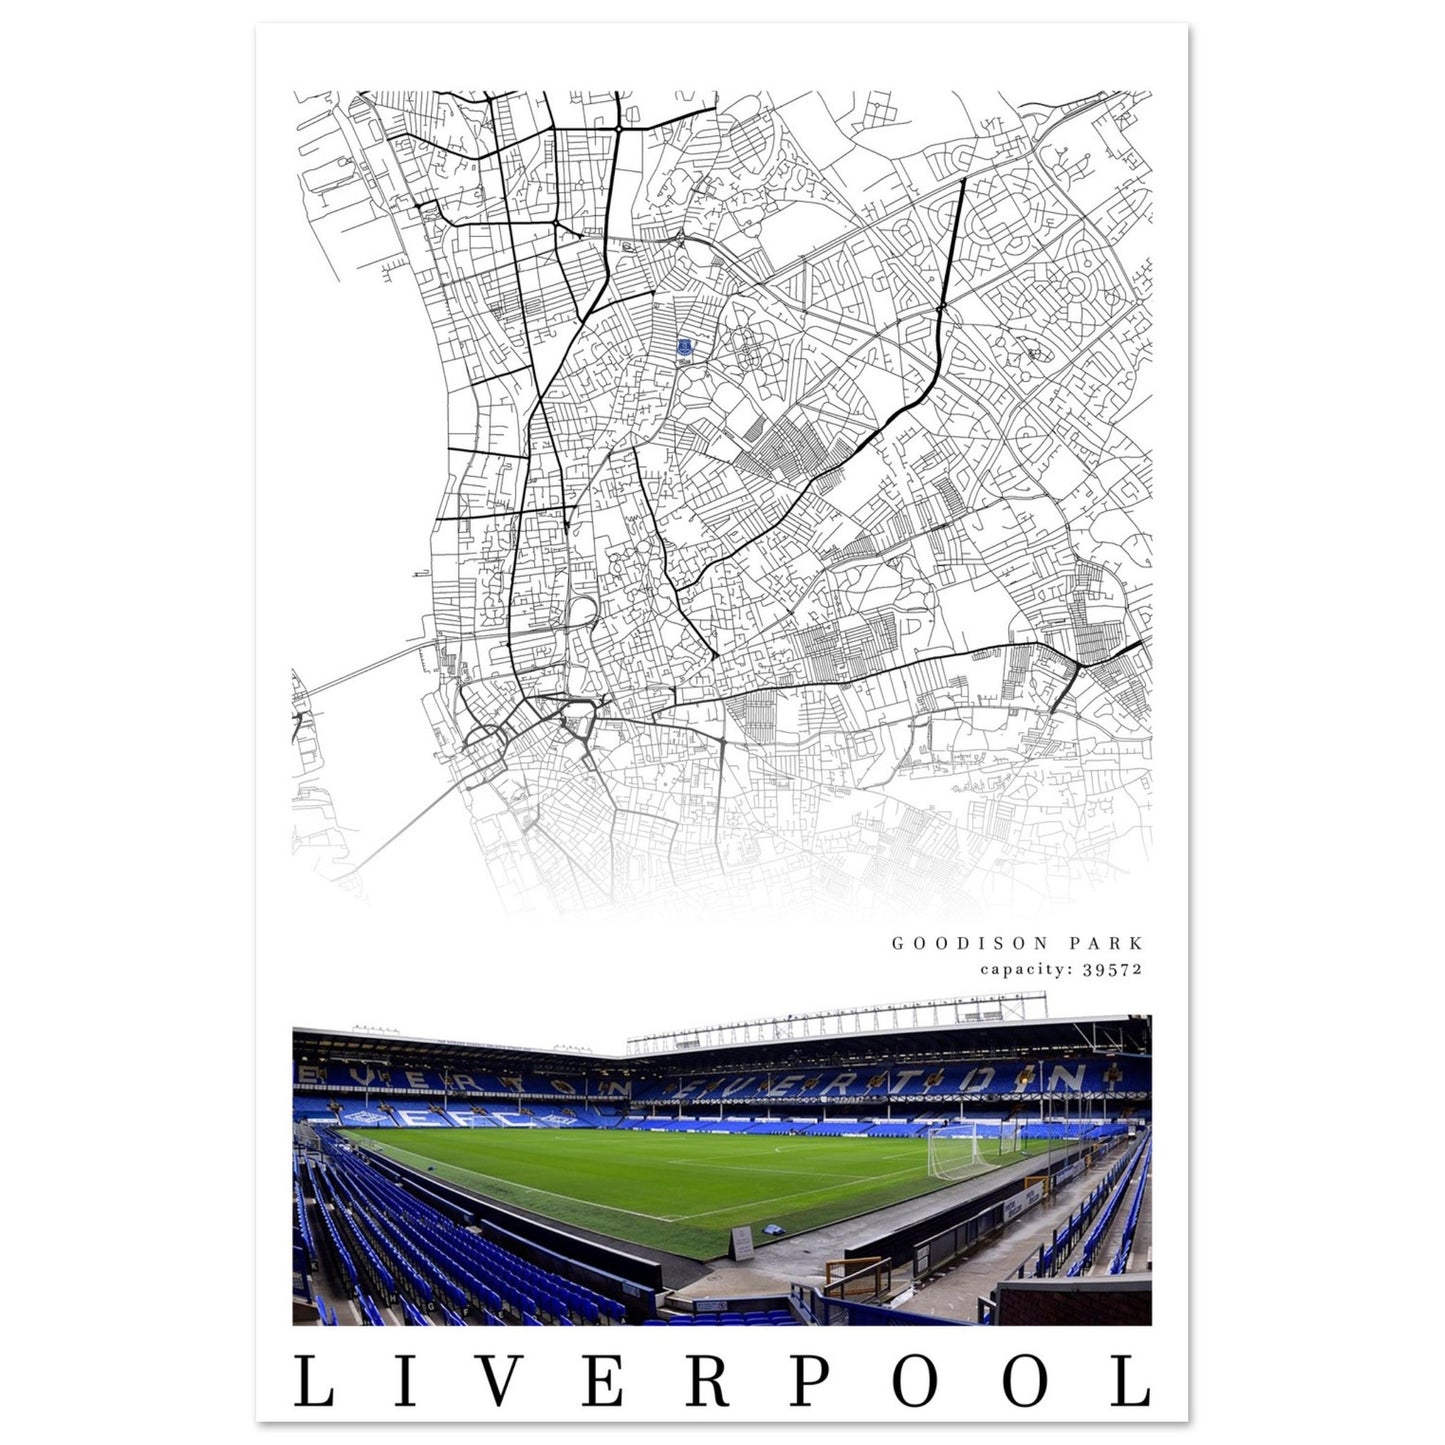 Map of Liverpool - Goodison Park